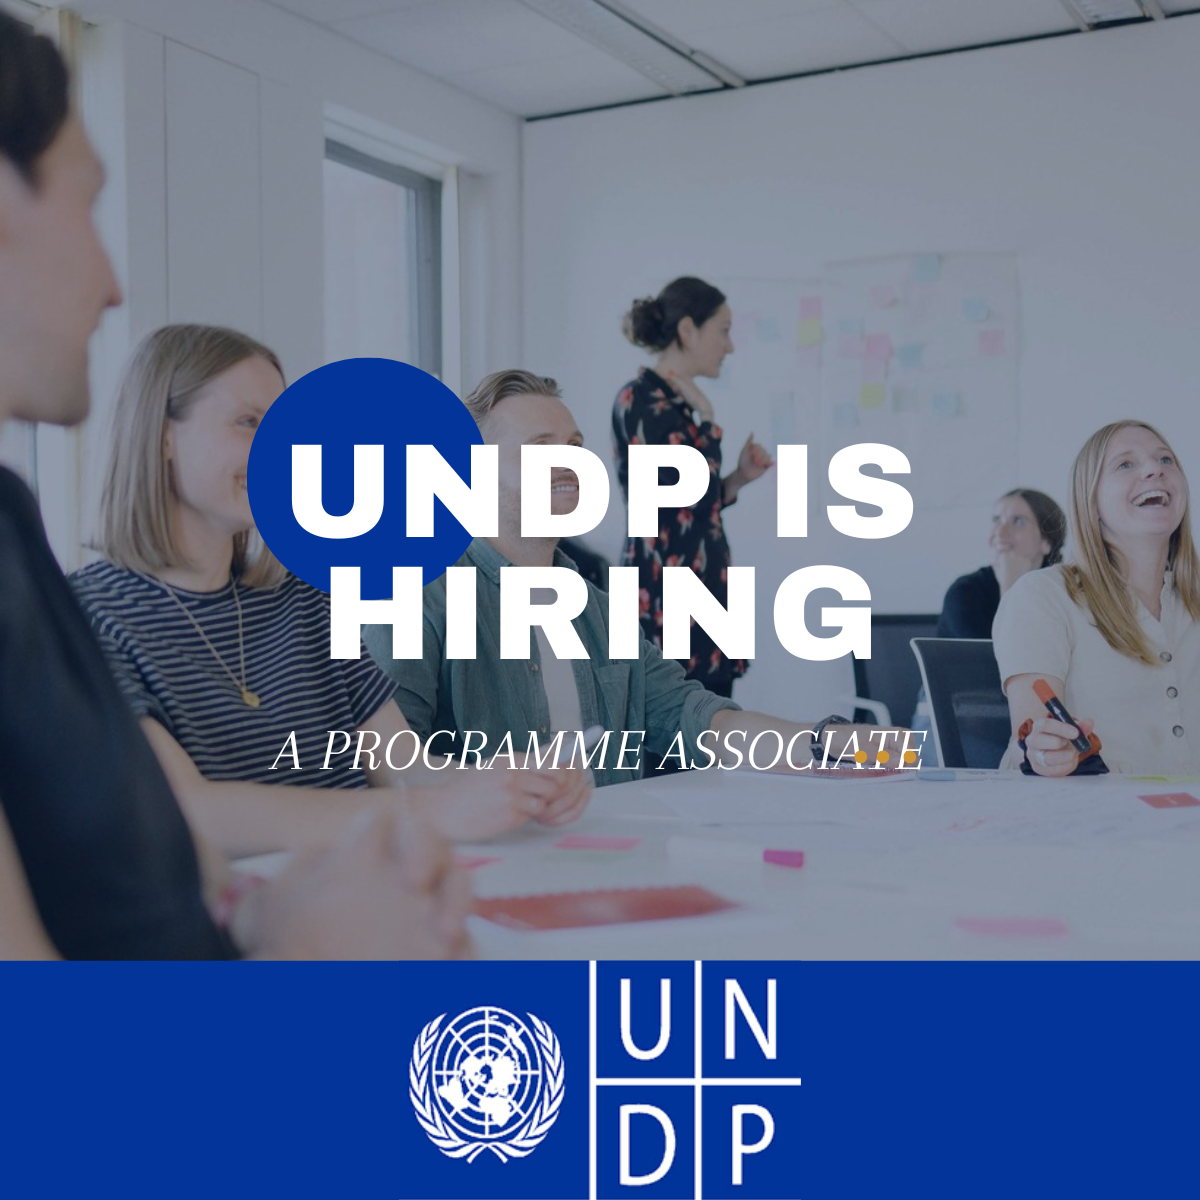 The United Nations Development Programme (UNDP) is currently looking for a Programme Associate. Apply now.